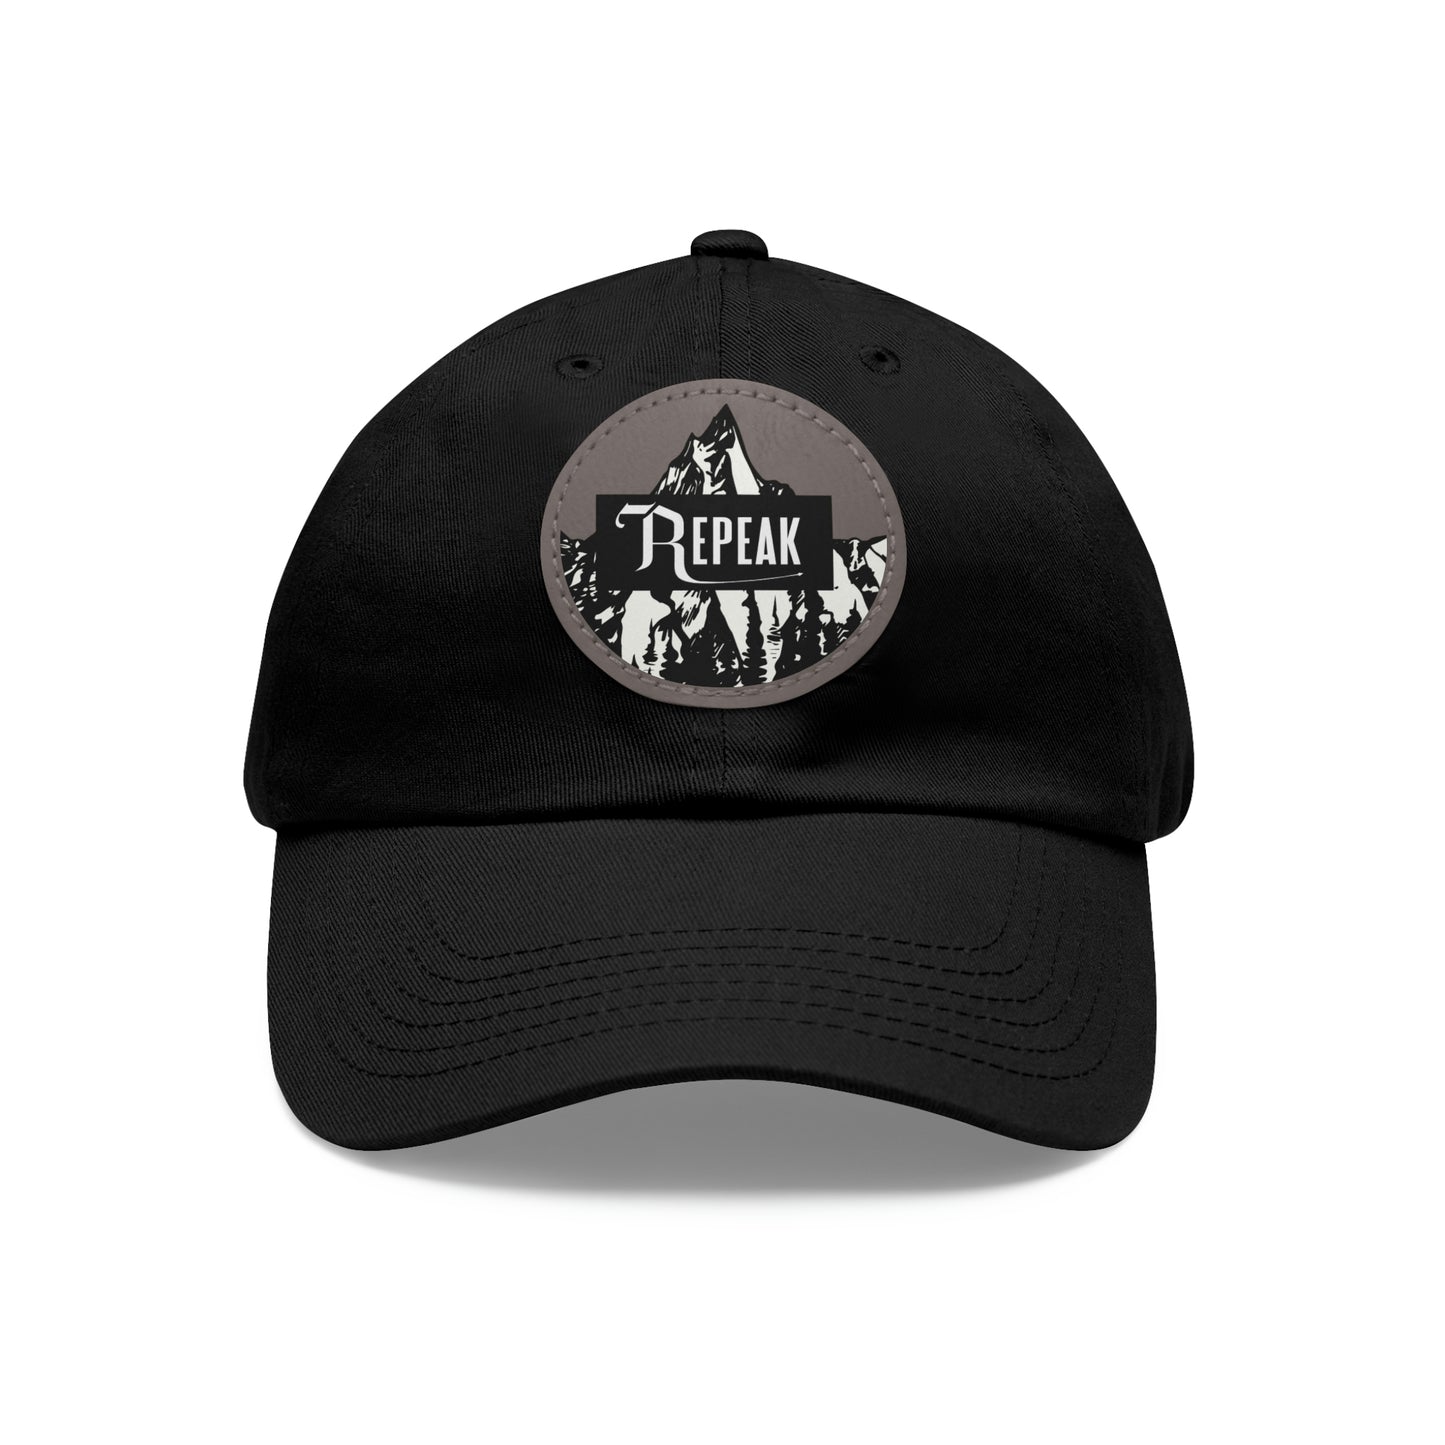 repeak energy dad hat, black, white, and gray, front side